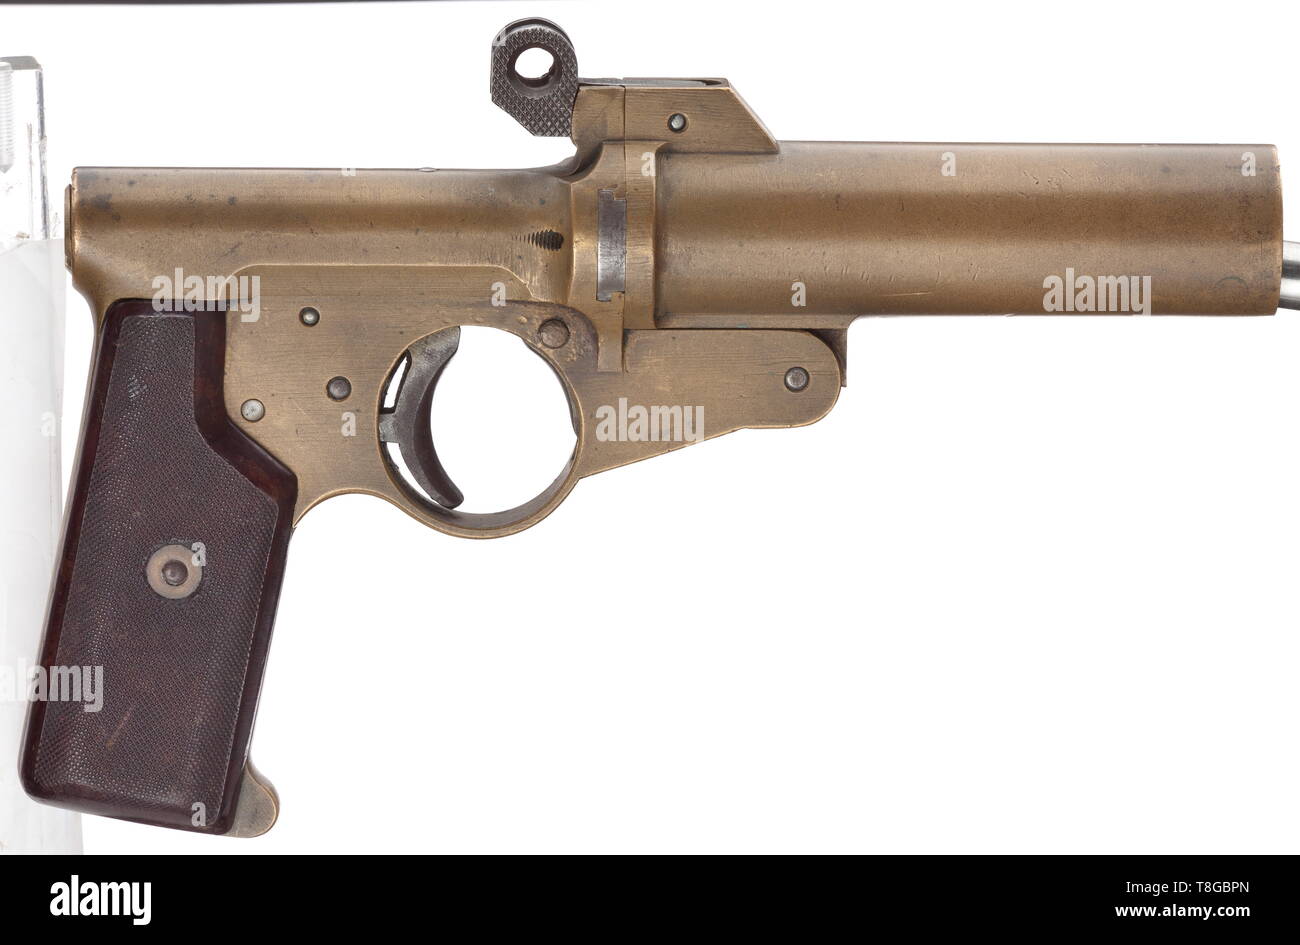 A single-barrelled signal pistol mod. A.W.W, Third Reich, navy Cal. 4, no. 614. Matching numbers. Drop barrel with snapper lock, length 112 mm. Total length 210 mm. Weight 905 g. Interior hammer. Safety. Signal pin. Construction attributed to Artilleriewerkstätten Wilhelmshaven. Slightly modified model. On left side of barrel latch and at rear of bolt housing navy acceptance marks eagle/swastika, 'M' missing. No further stamps or inscriptions. Brass grip frame and barrel. Smooth trigger, modified opening lever, breech-block, modified safety, mechanical parts and screws made, Editorial-Use-Only Stock Photo